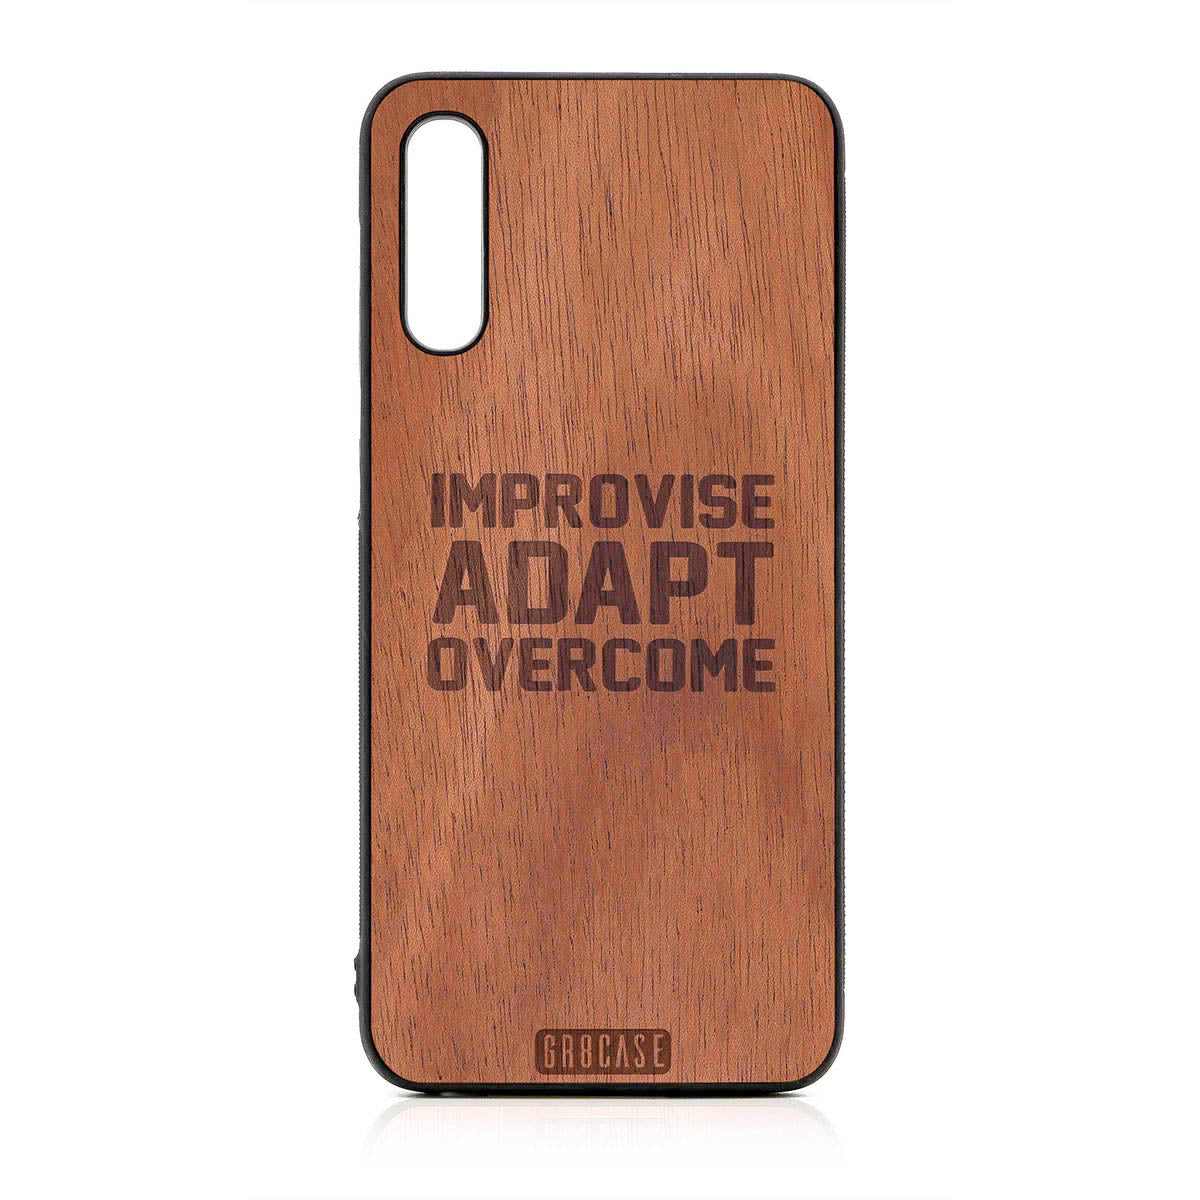 Improvise Adapt Overcome Design Wood Case For Samsung Galaxy A50